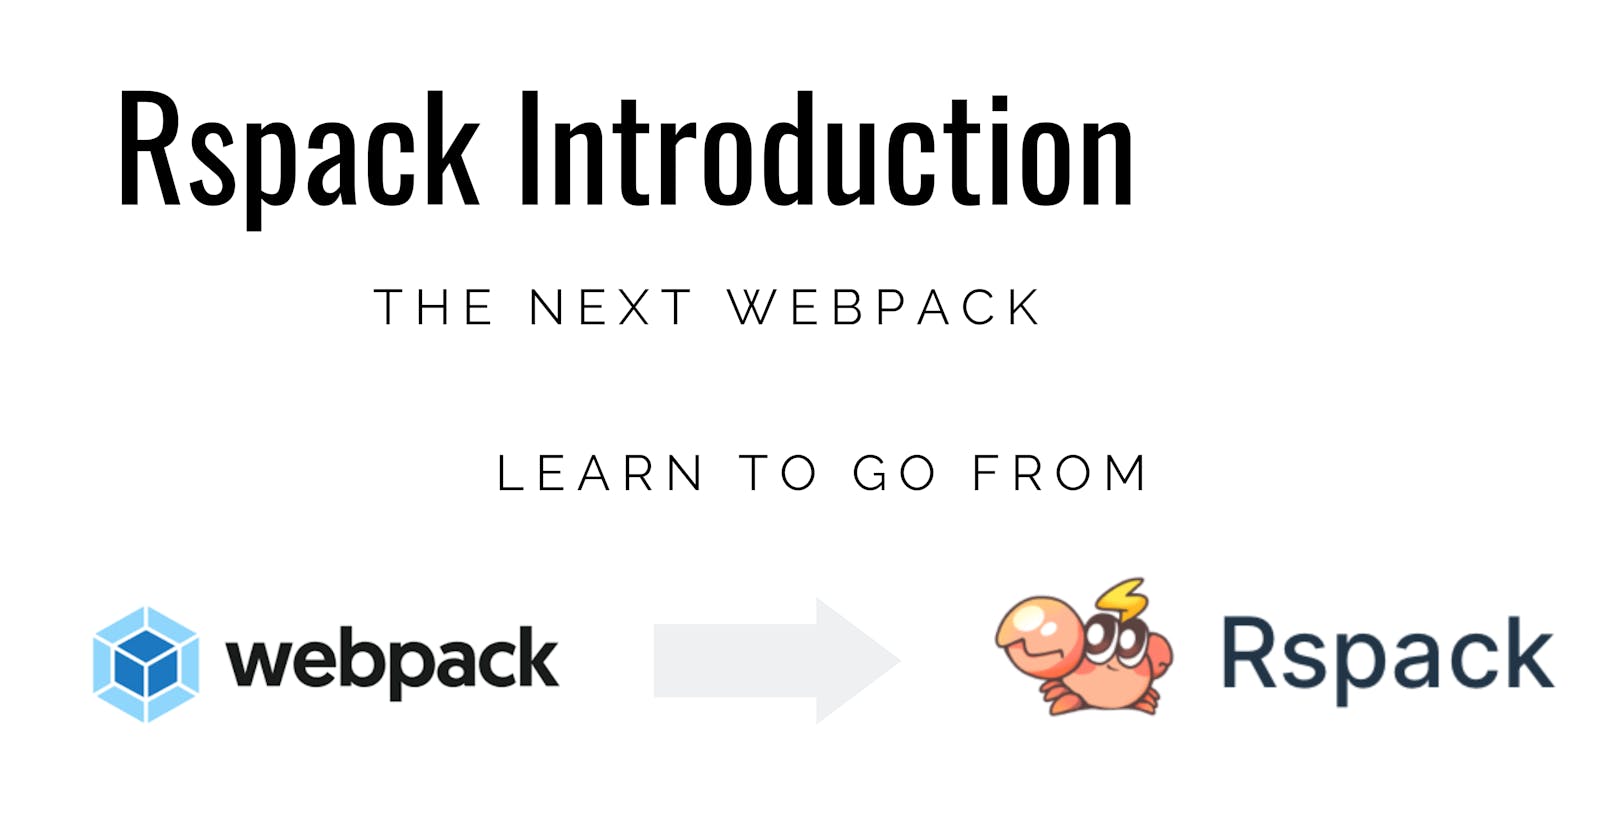 Webpack just got an update, and it's fast. Intro to Rspack and migration.